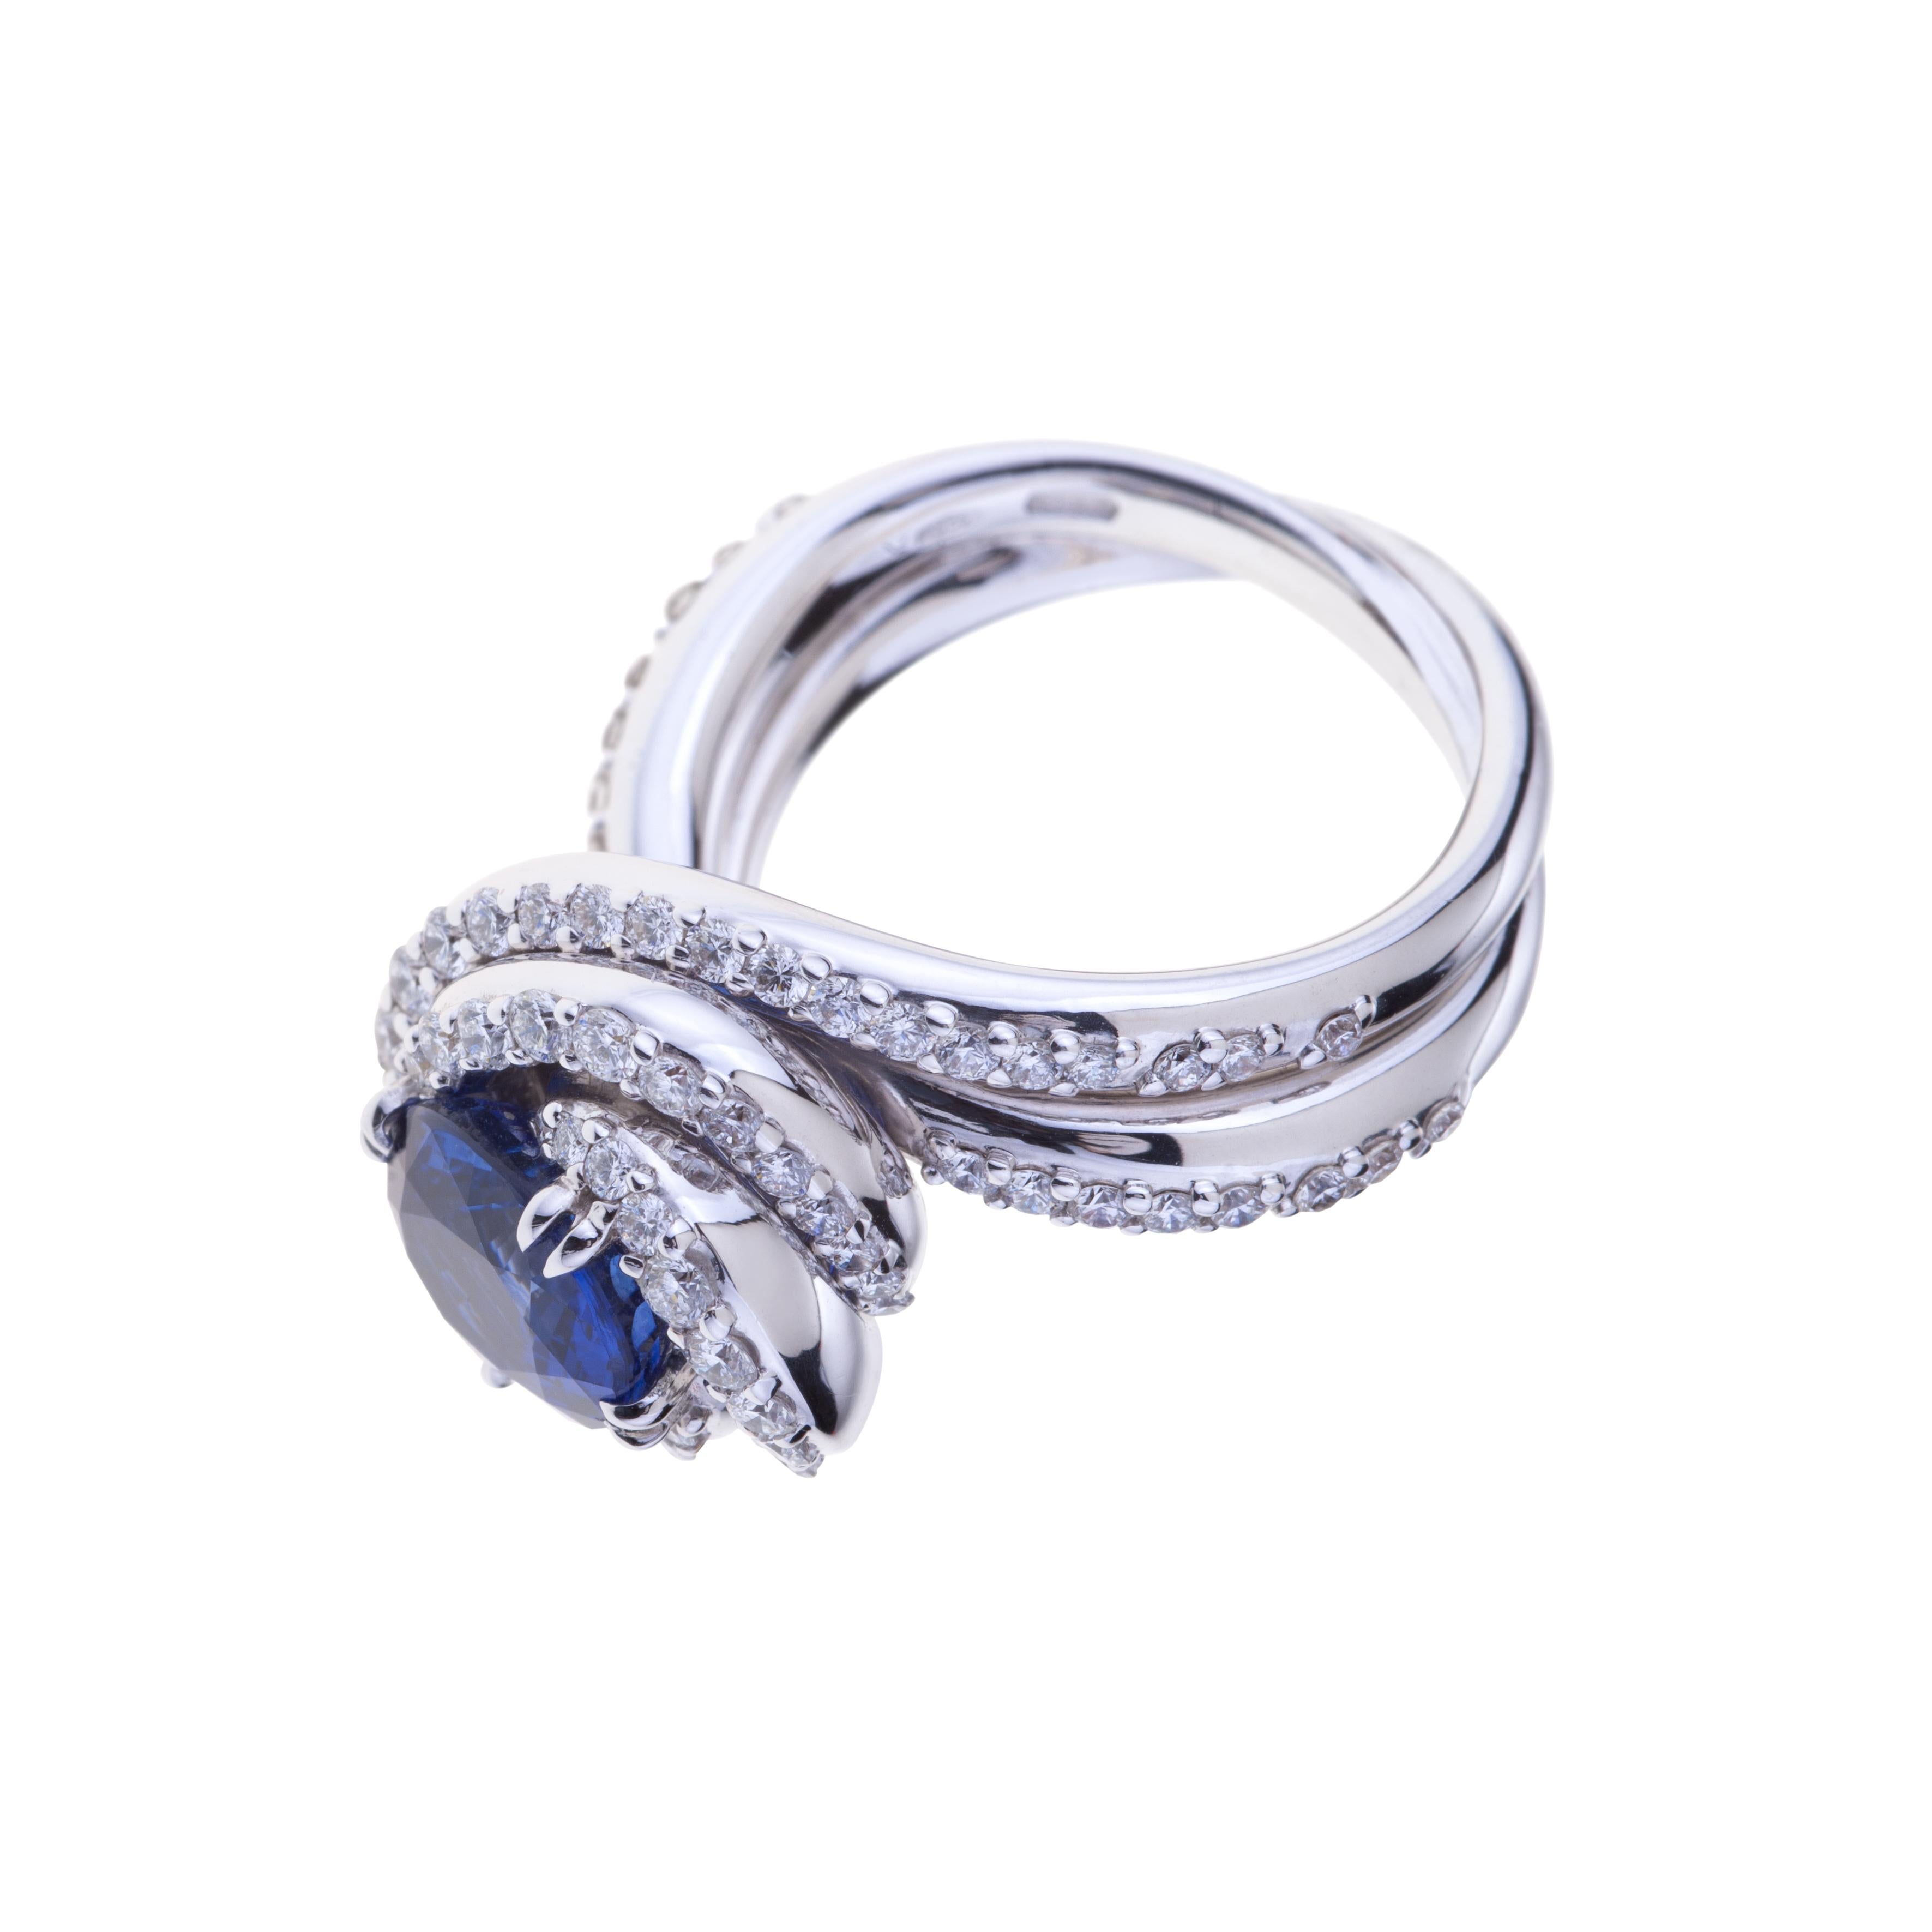 Sapphire 4.07 ct. (Certificate) Ring White Gold with Circle of Diamonds
A Contemporary Design for this Ring with a Stunning Blue Oval Sapphire 4.07ct. size 9.87x8.26x5.96 mm and Circle Diamonds (ct. 1.23) for a Unique Piece. You might be interested